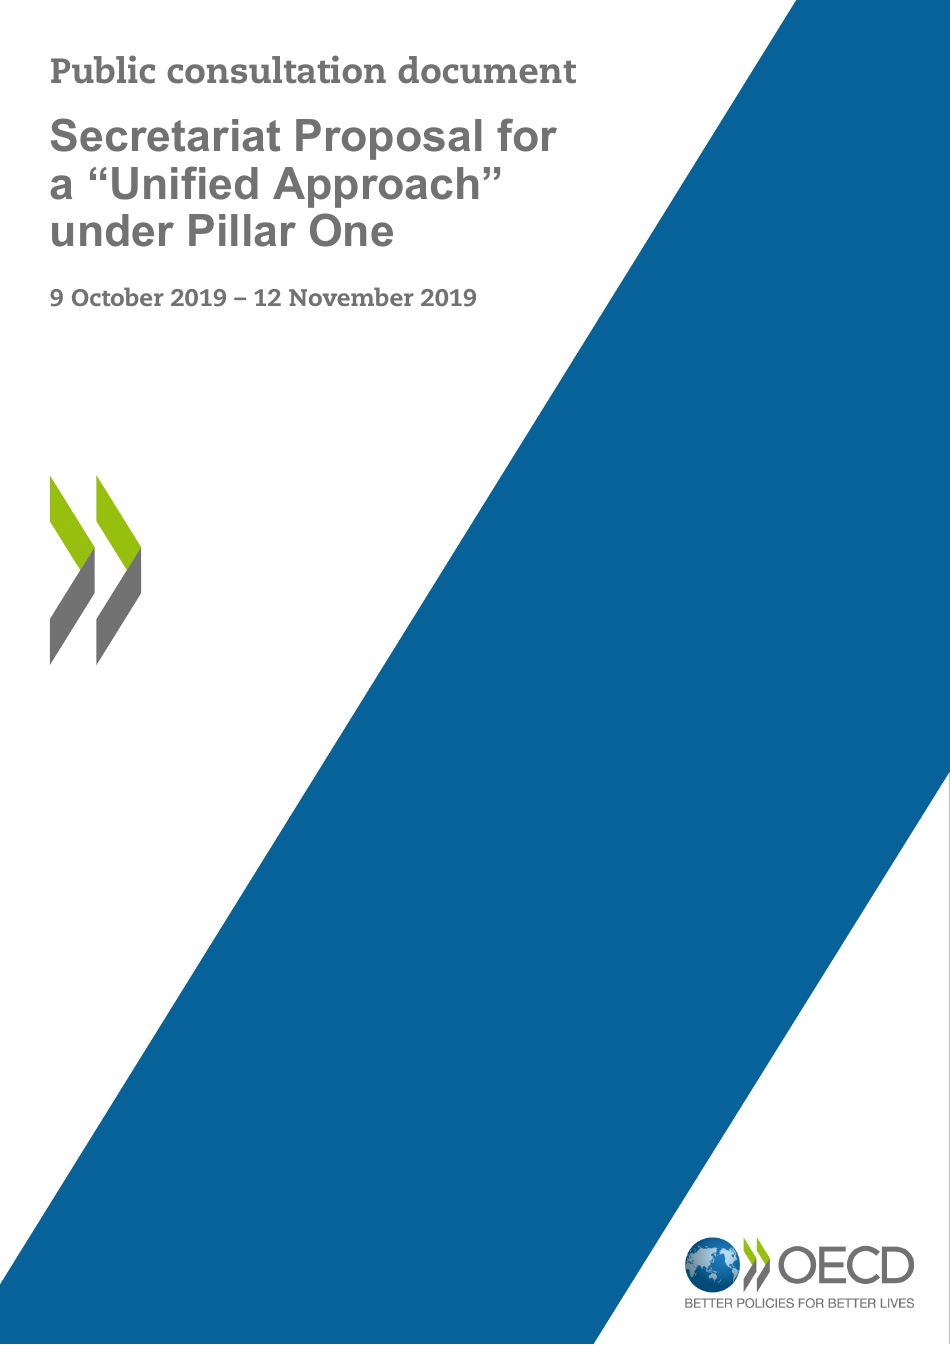 Oecd Public Consultation Document: Secretariat Proposal for a unified Approach Under Pillar One - 9 October 2019 - 12 November 2019, Page 1